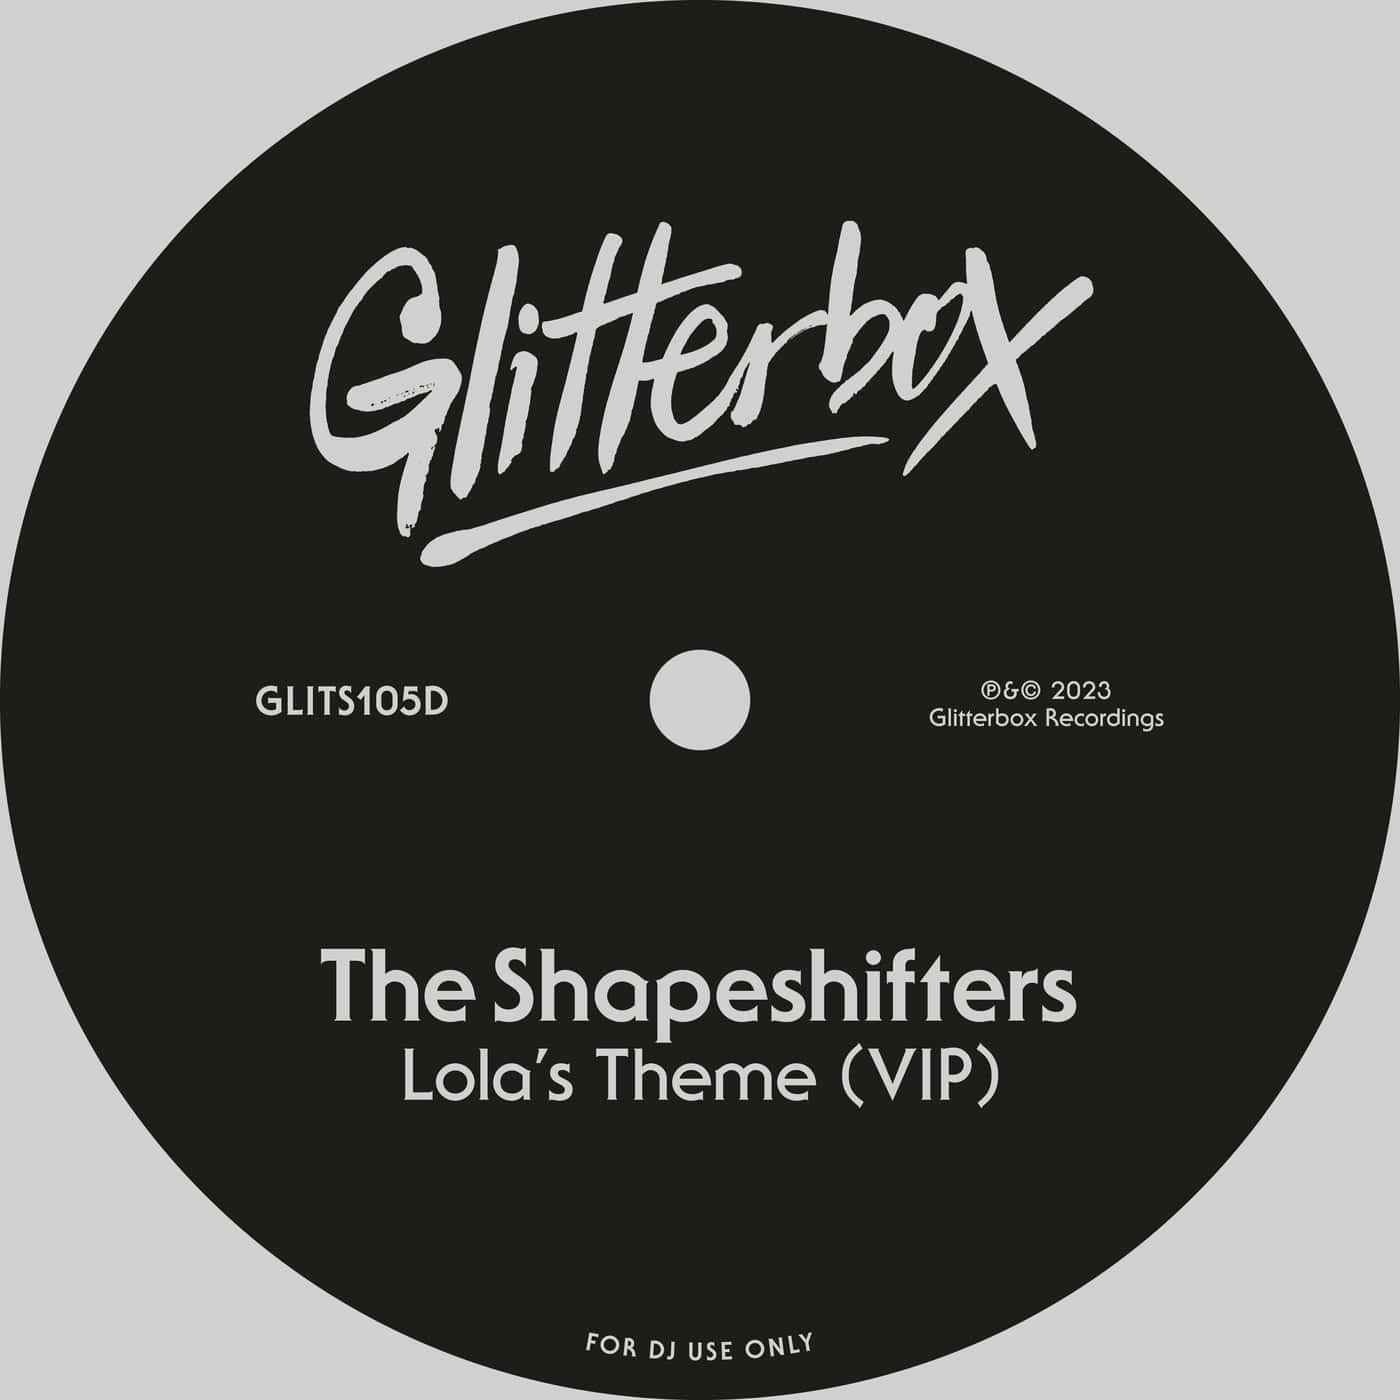 Download The Shapeshifters - Lola's Theme - VIP on Electrobuzz